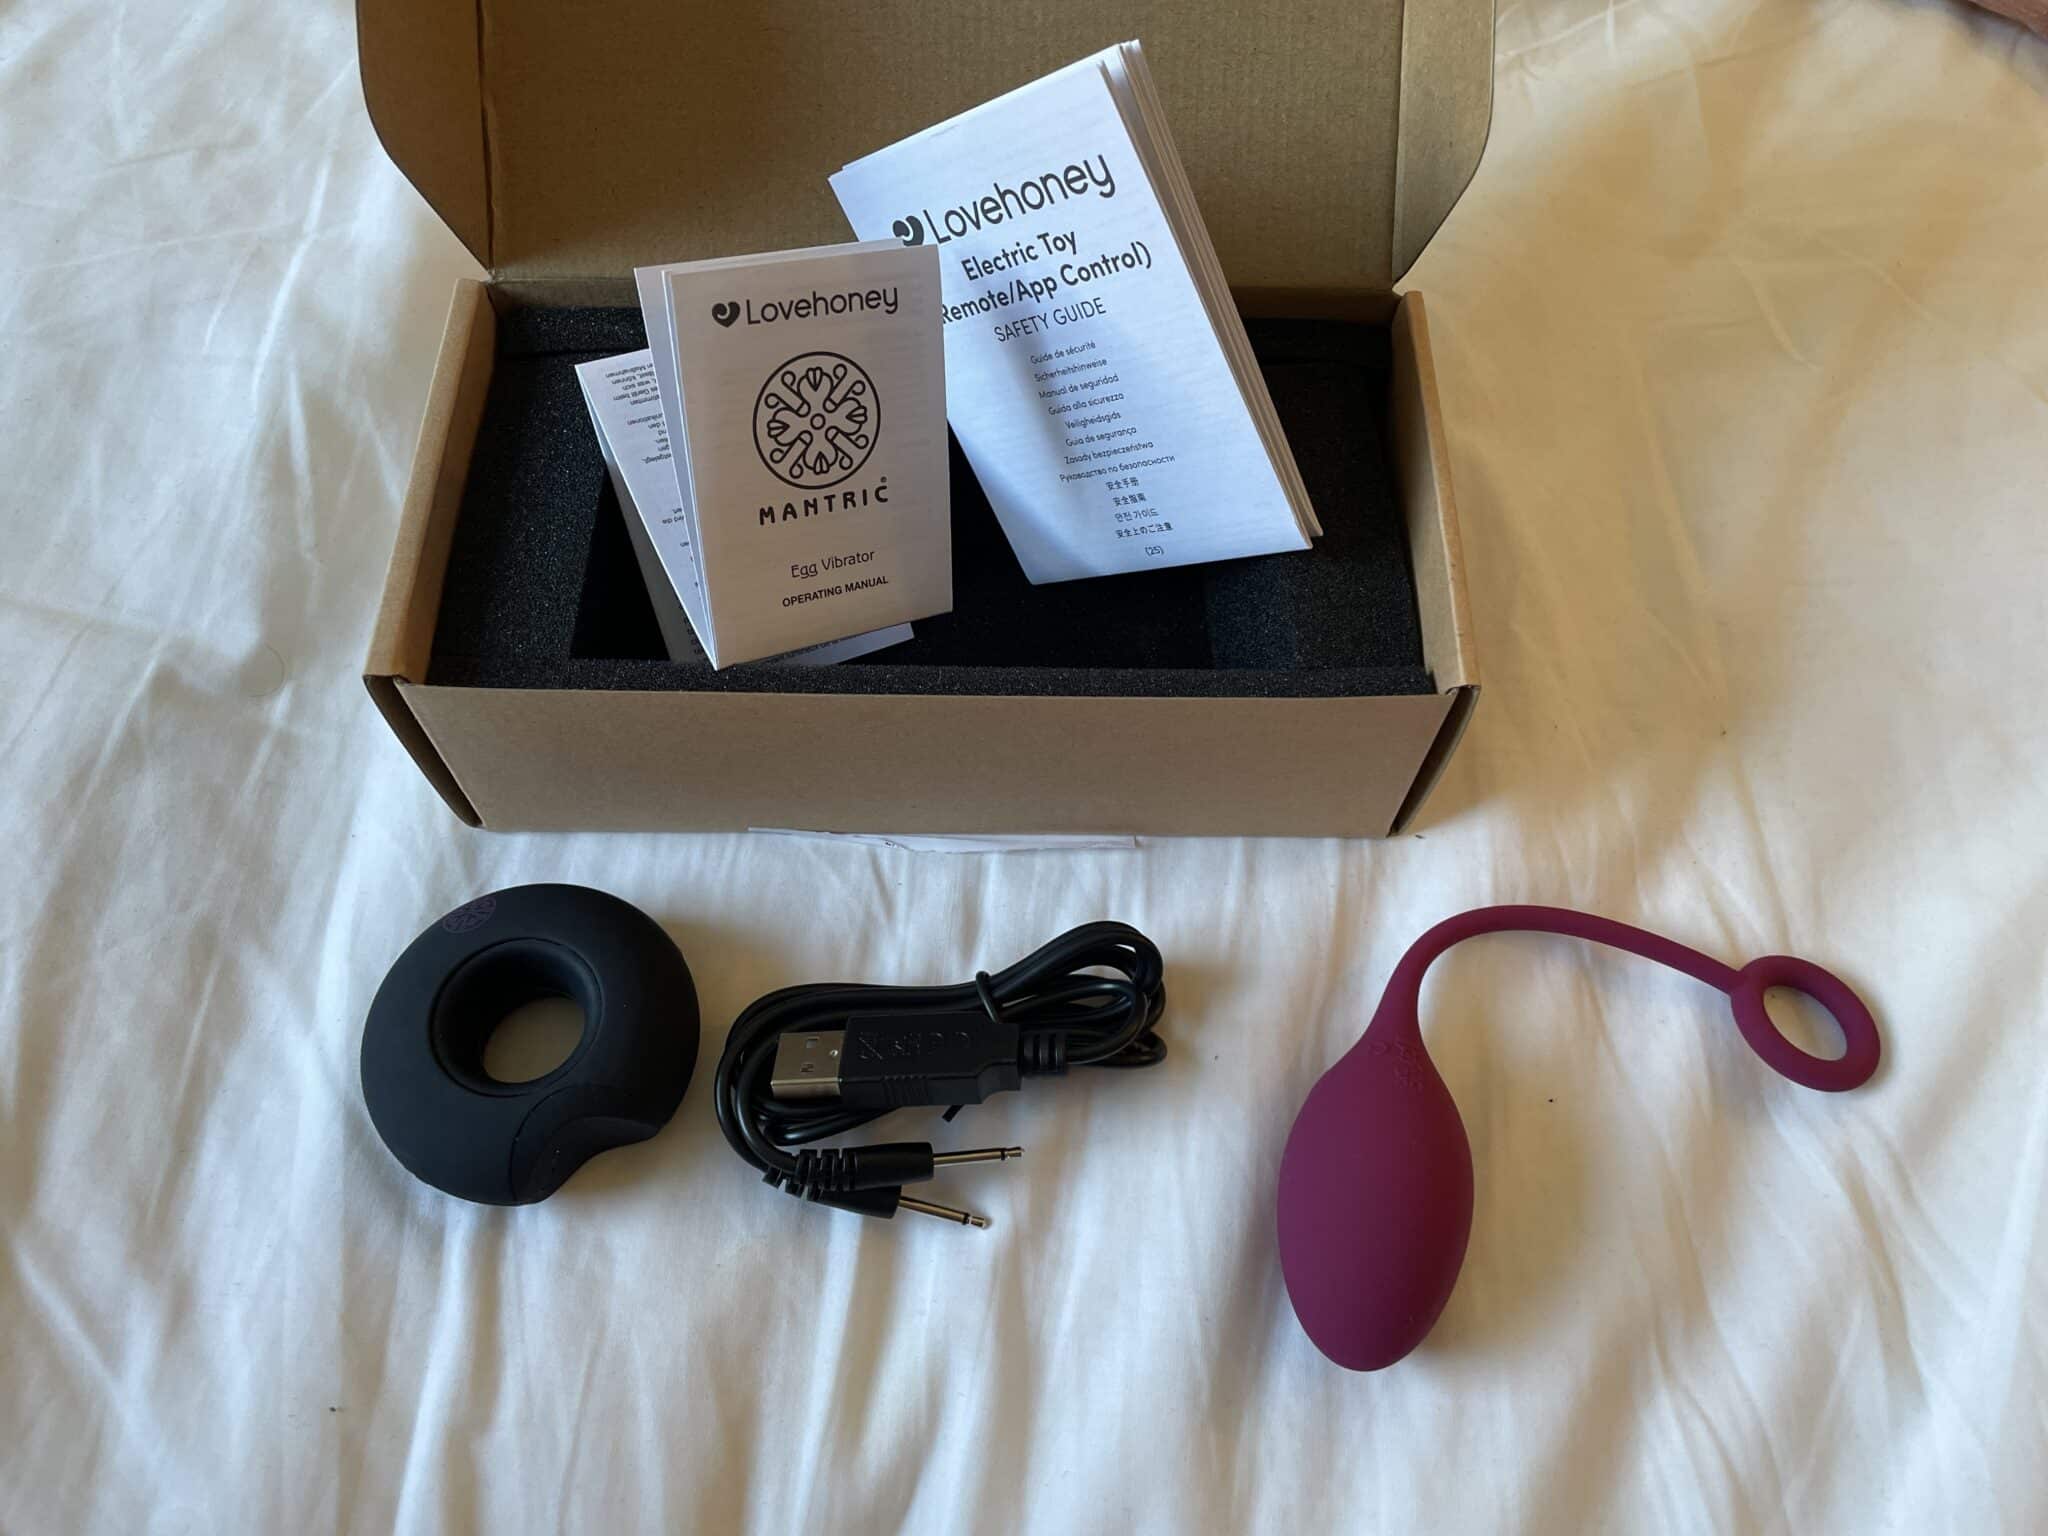 Mantric Rechargeable Remote Control Egg Vibrator The Mantric Rechargeable Remote Control Egg Vibrator: Does it Deliver on Performance?